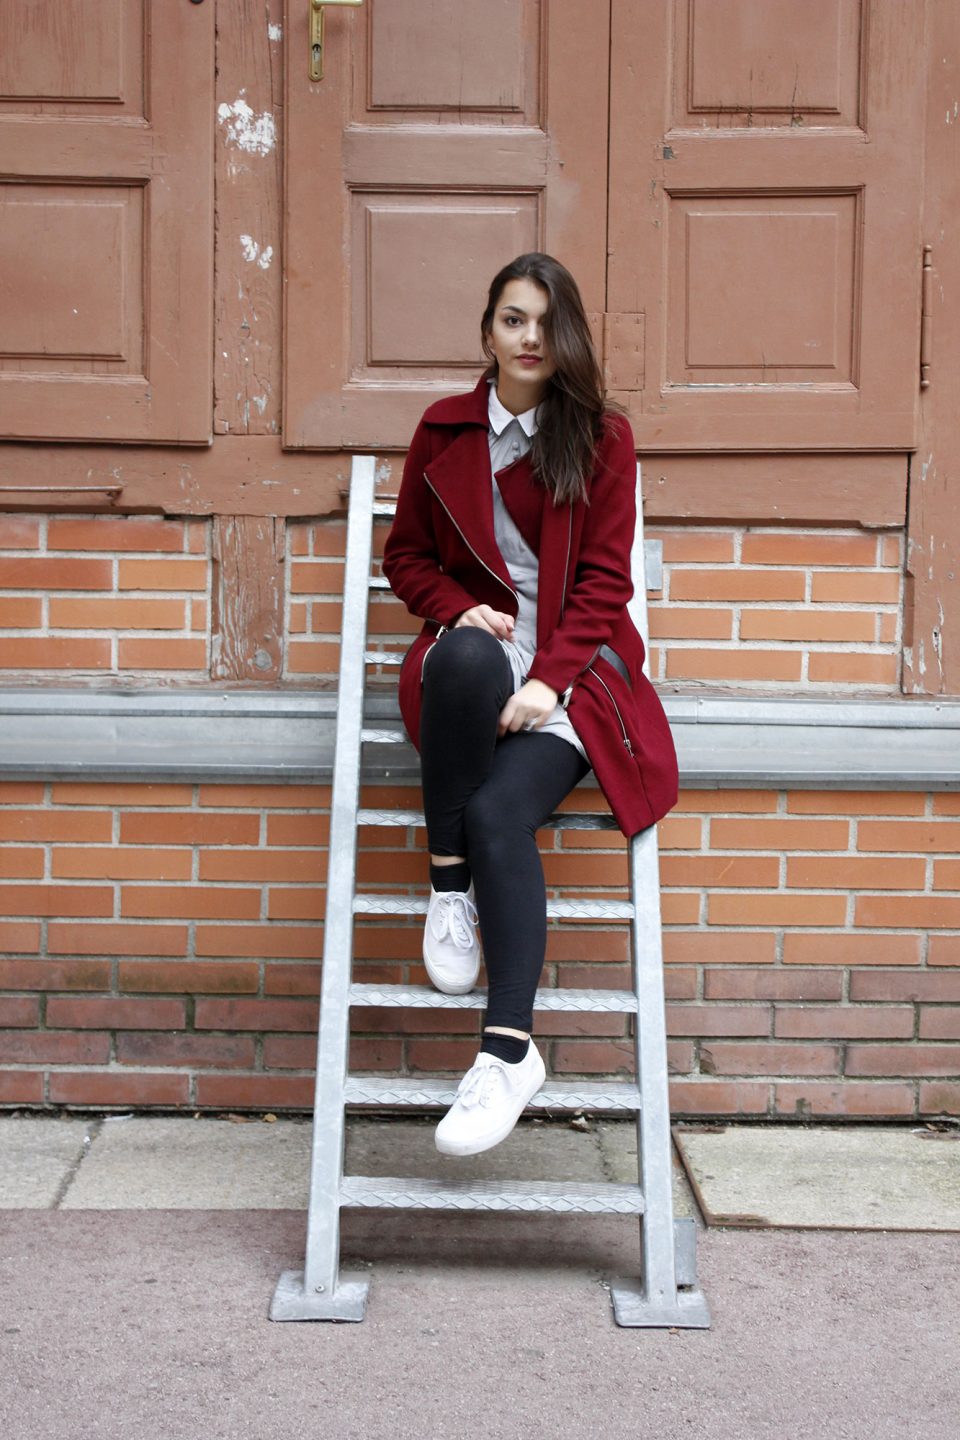 Dorie sitting on a ladder, wearing a red coat from Stradivarius, a grey dress, black legging and white shoes from even&odd